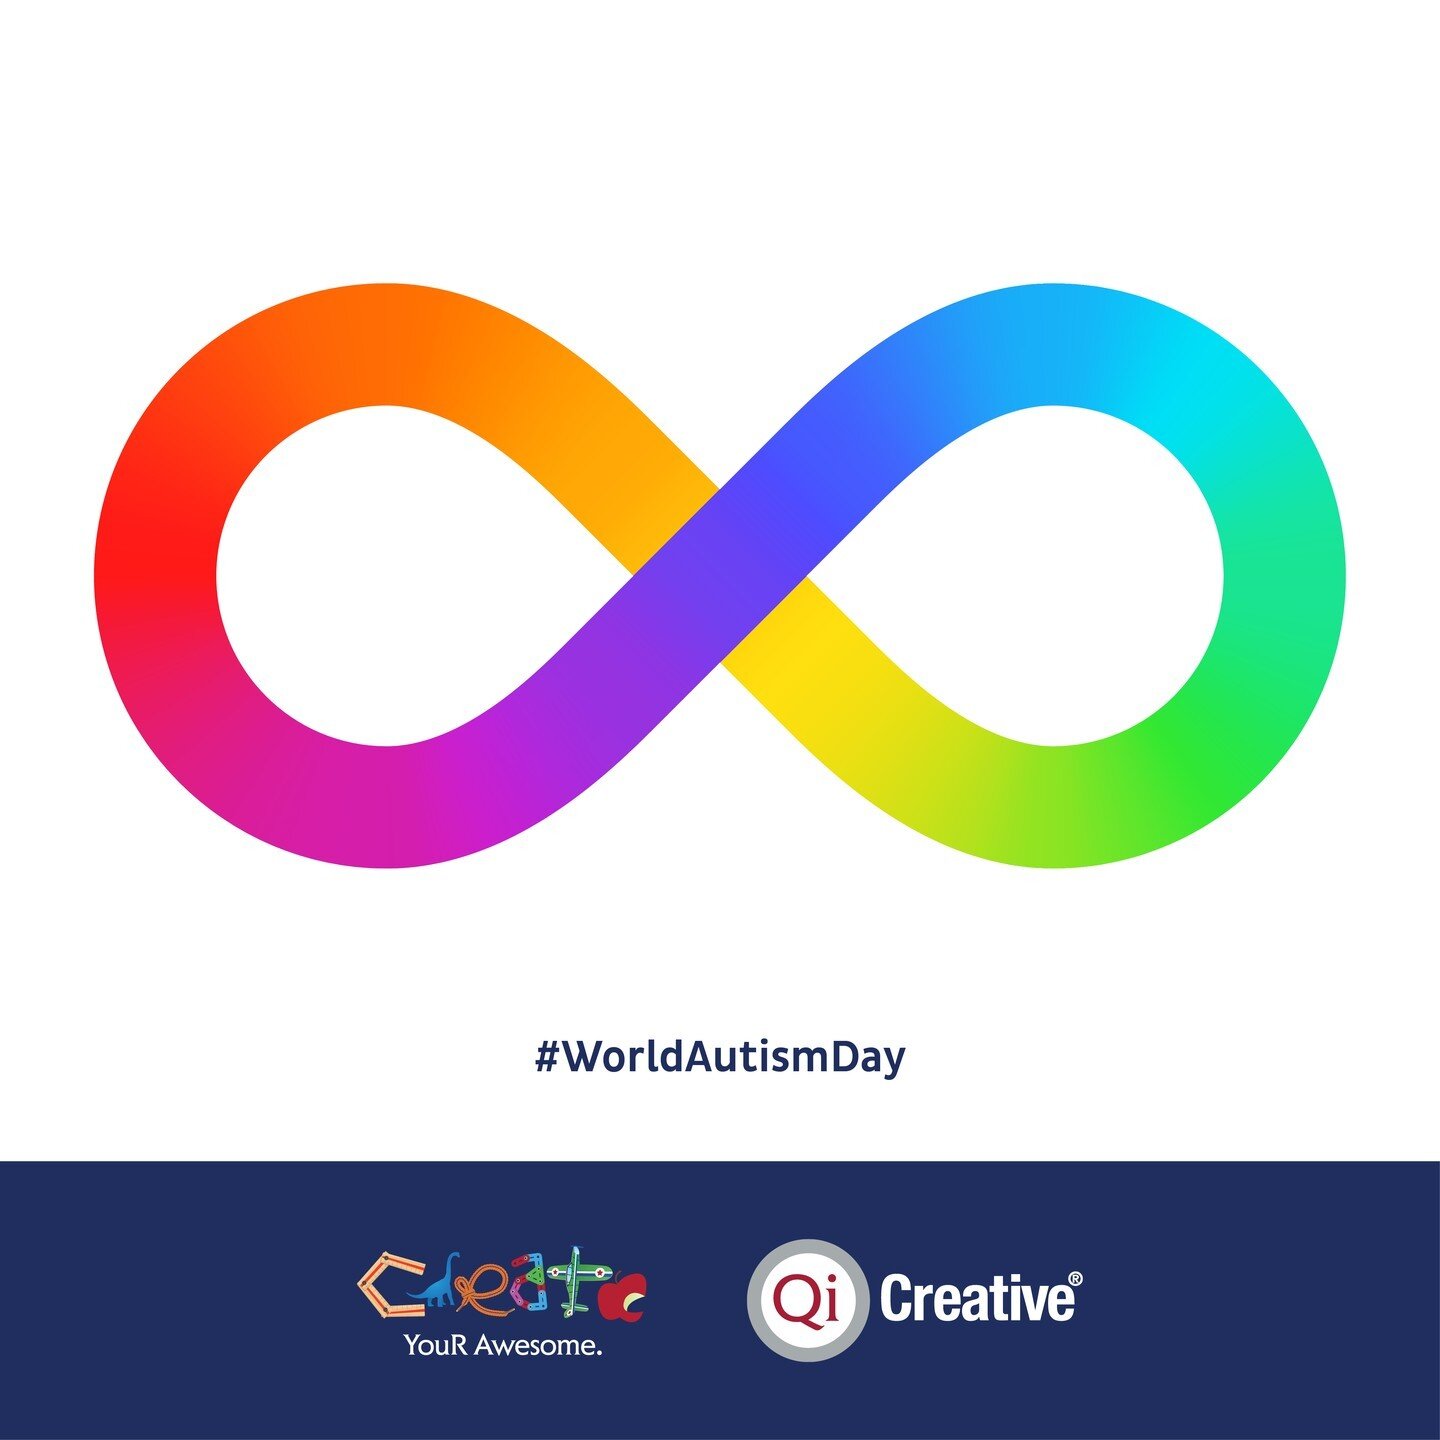 🌟 Happy World Autism Day! At Qi Creative, we enthusiastically embrace neurodiversity. We're dedicated to creating meaningful learning experiences with children, adolescents, families, and schools of all abilities. Let's celebrate the unique strength